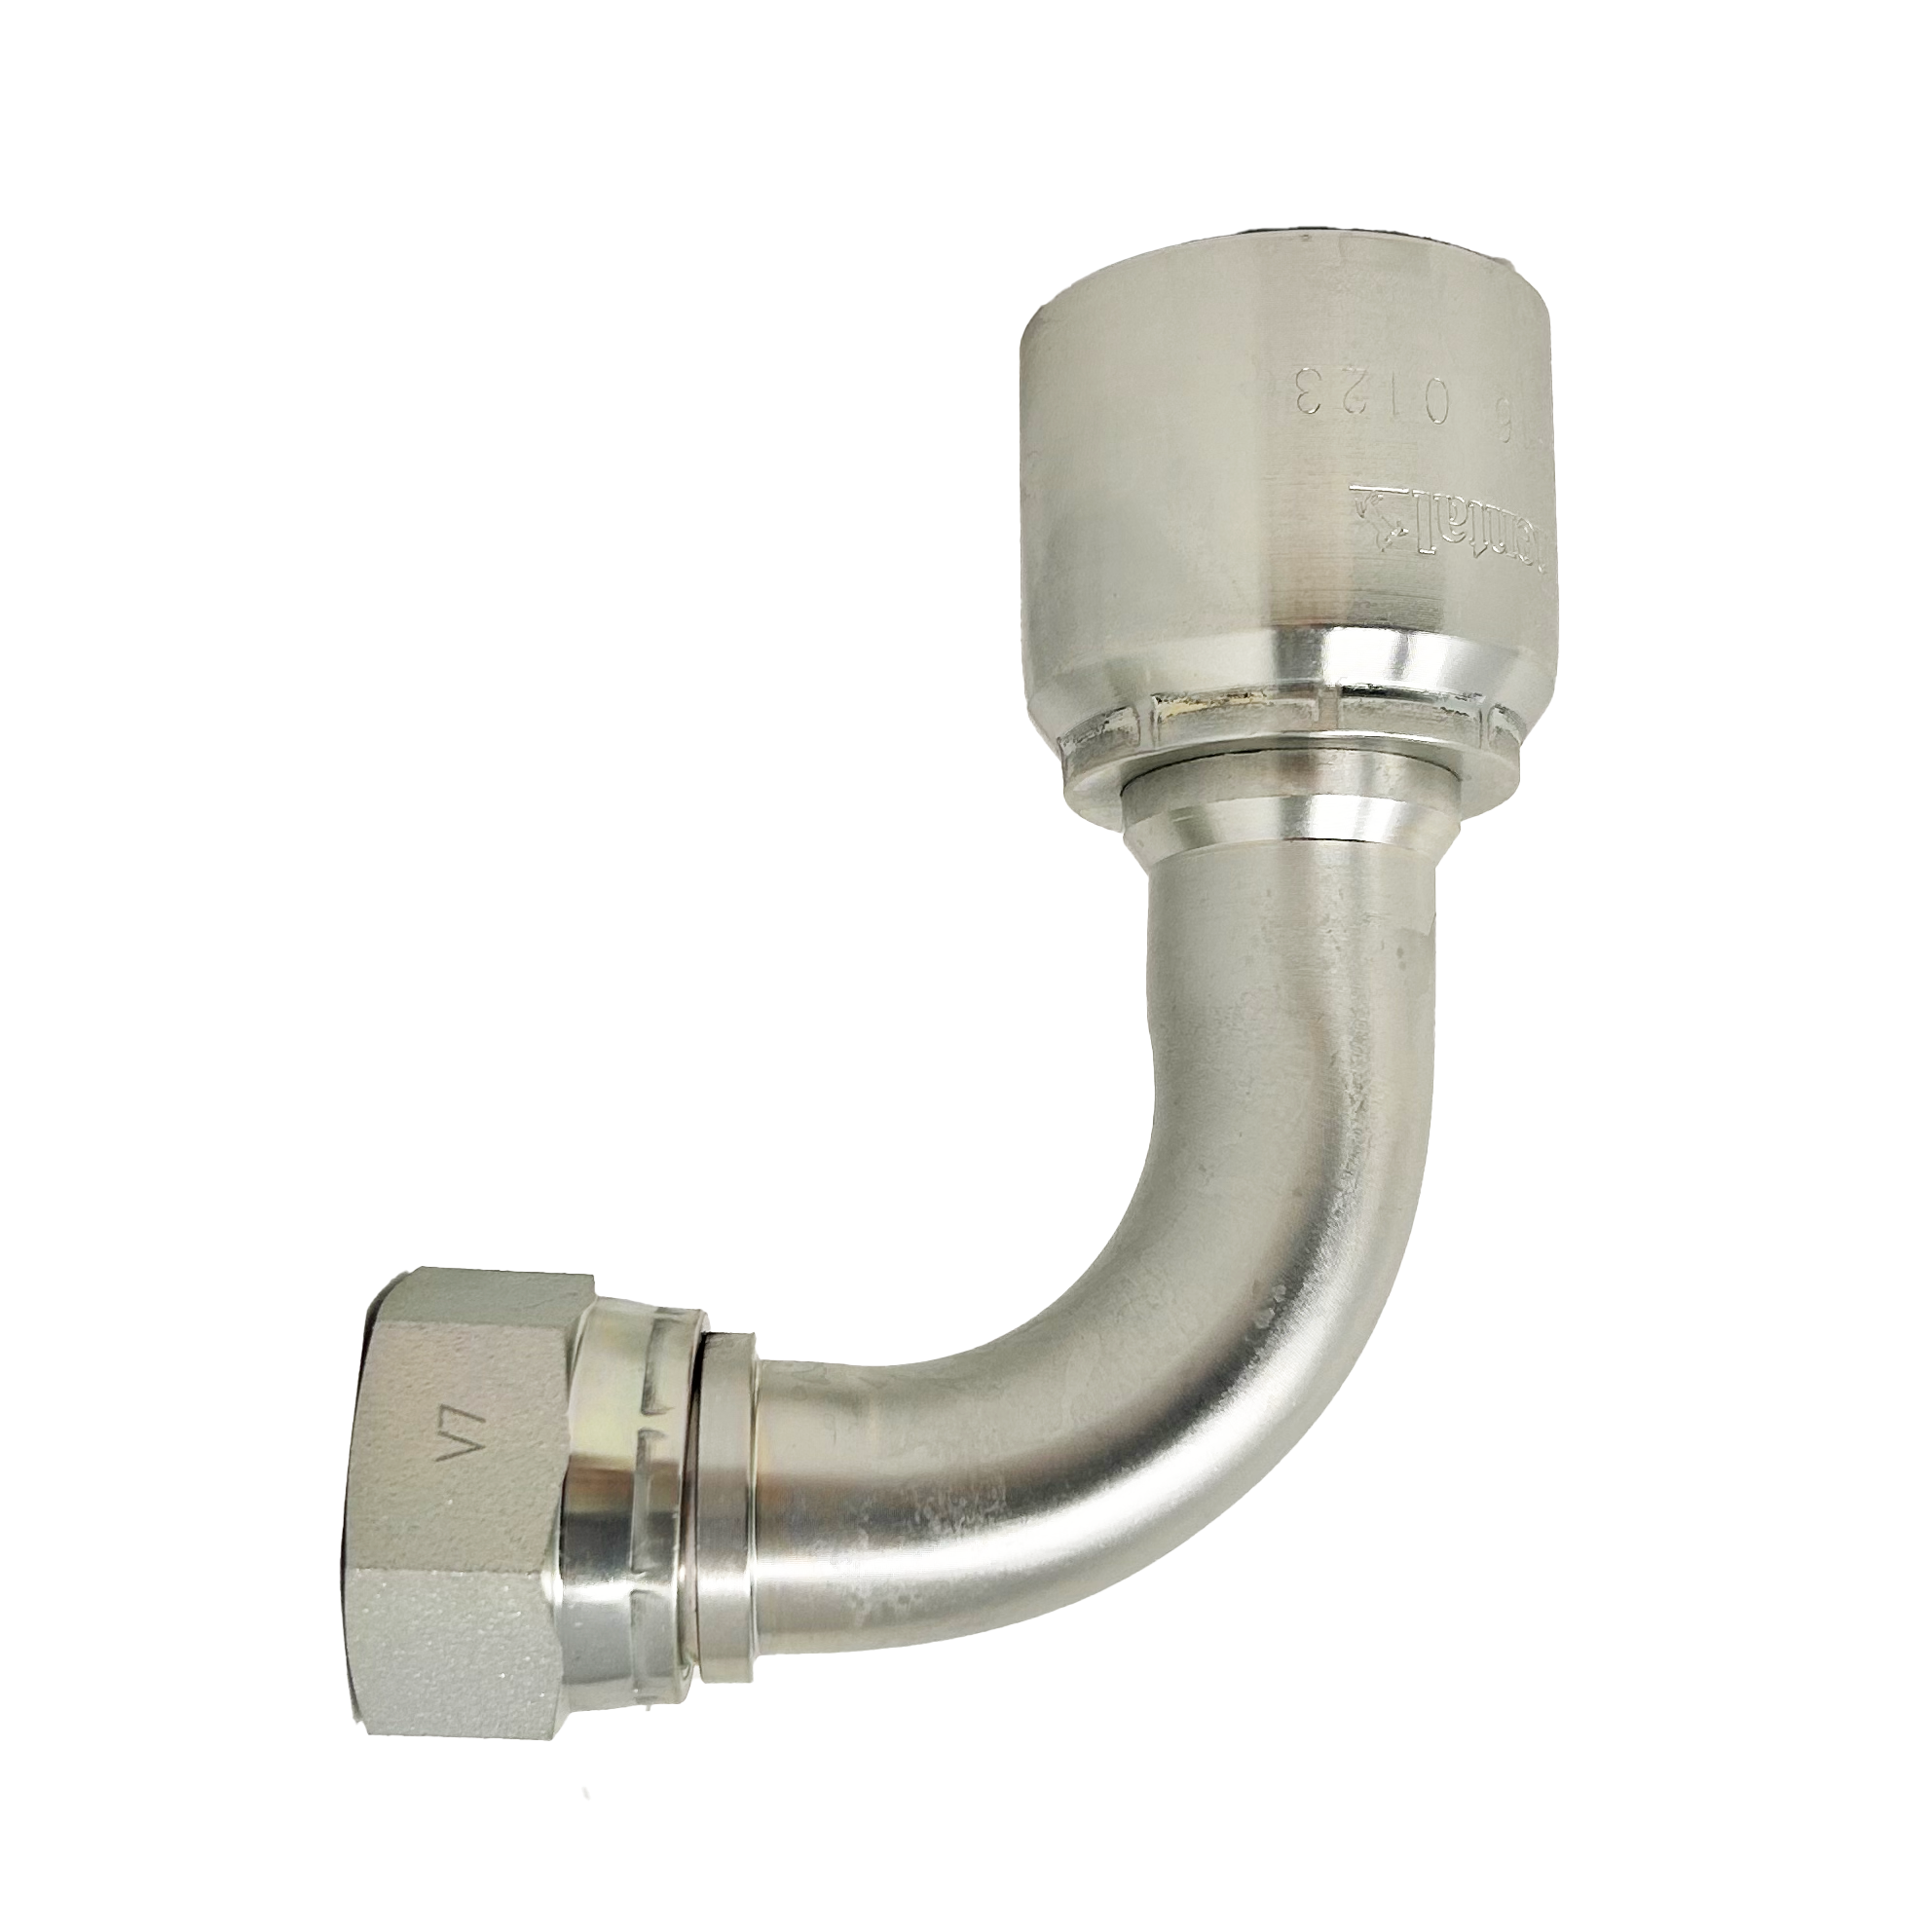 B2-JCFX90-1216: Continental Hose Fitting, 0.75 (3/4") Hose ID x 1-5/16-12 Female JIC, 90-Degree Swivel Connection